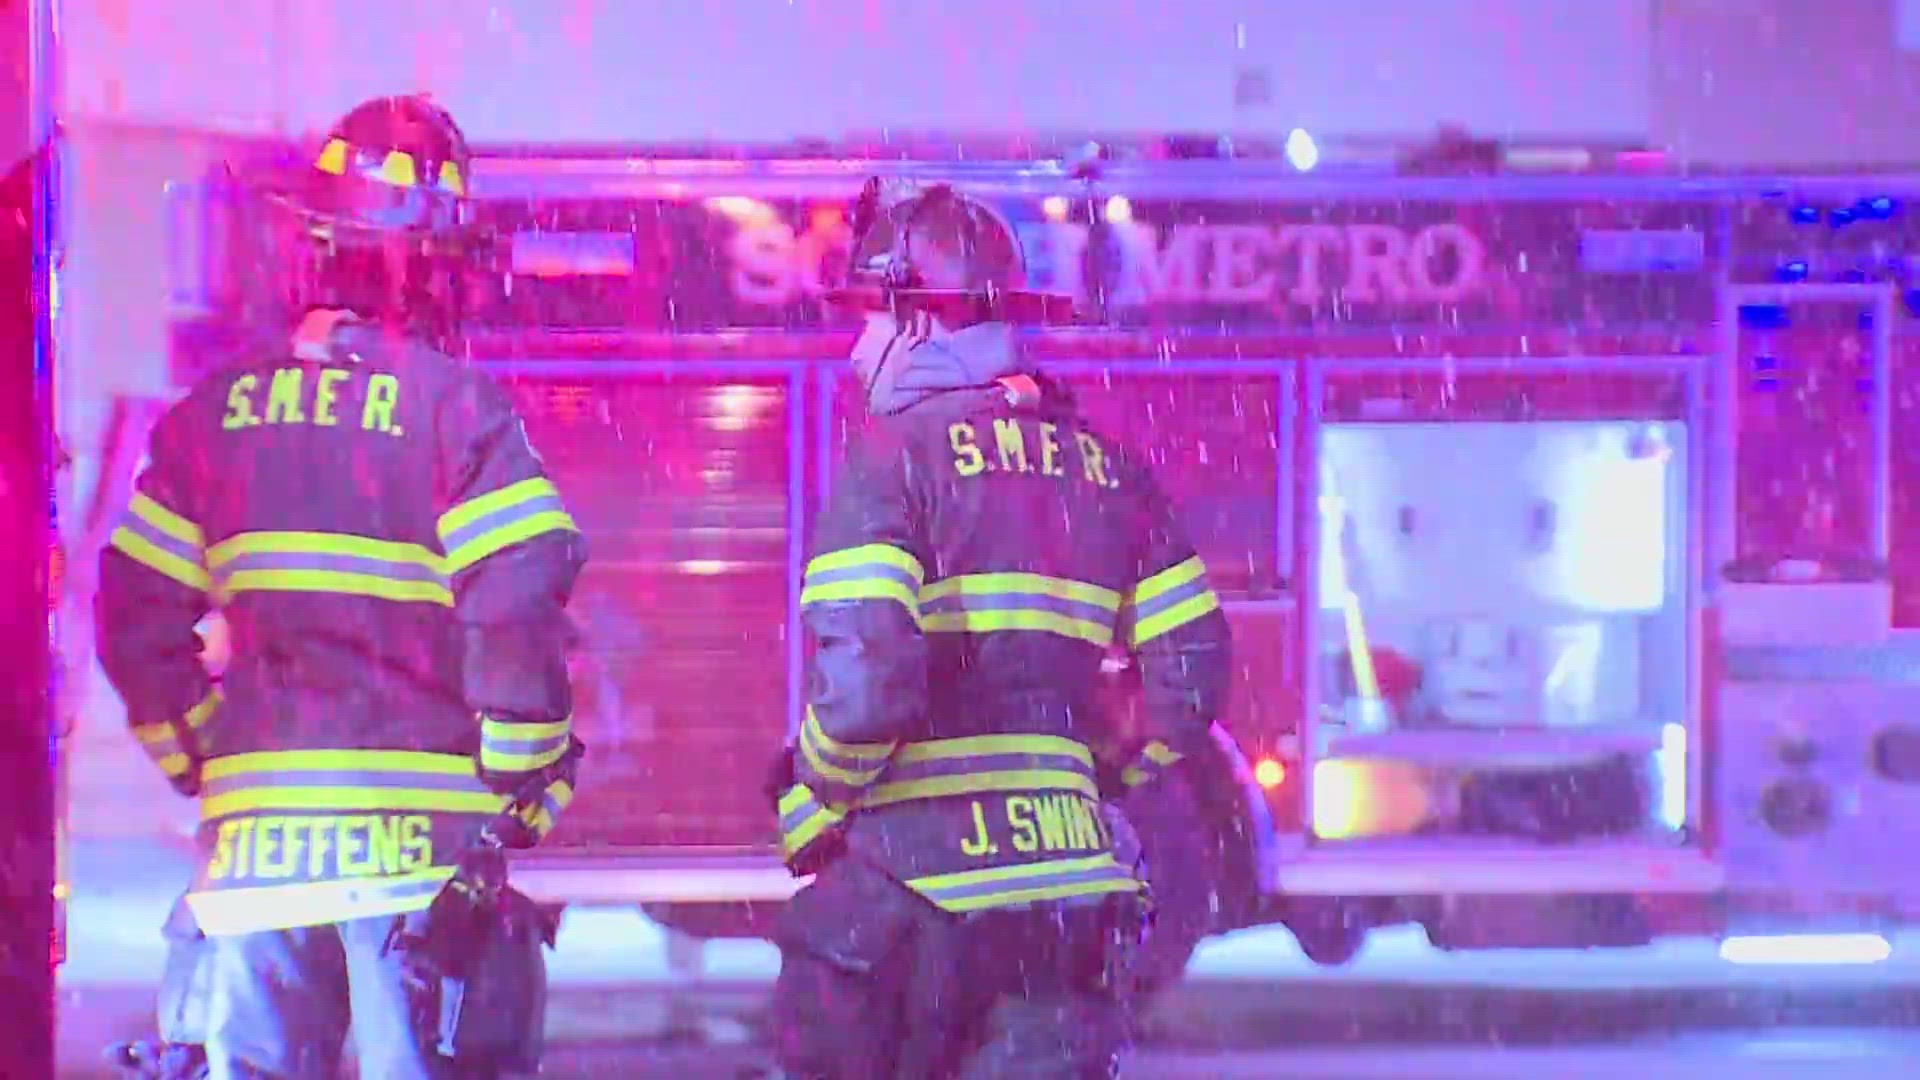 The fires started in the 9600 block of East Arapahoe Road early Friday morning, according to South Metro Fire Rescue.